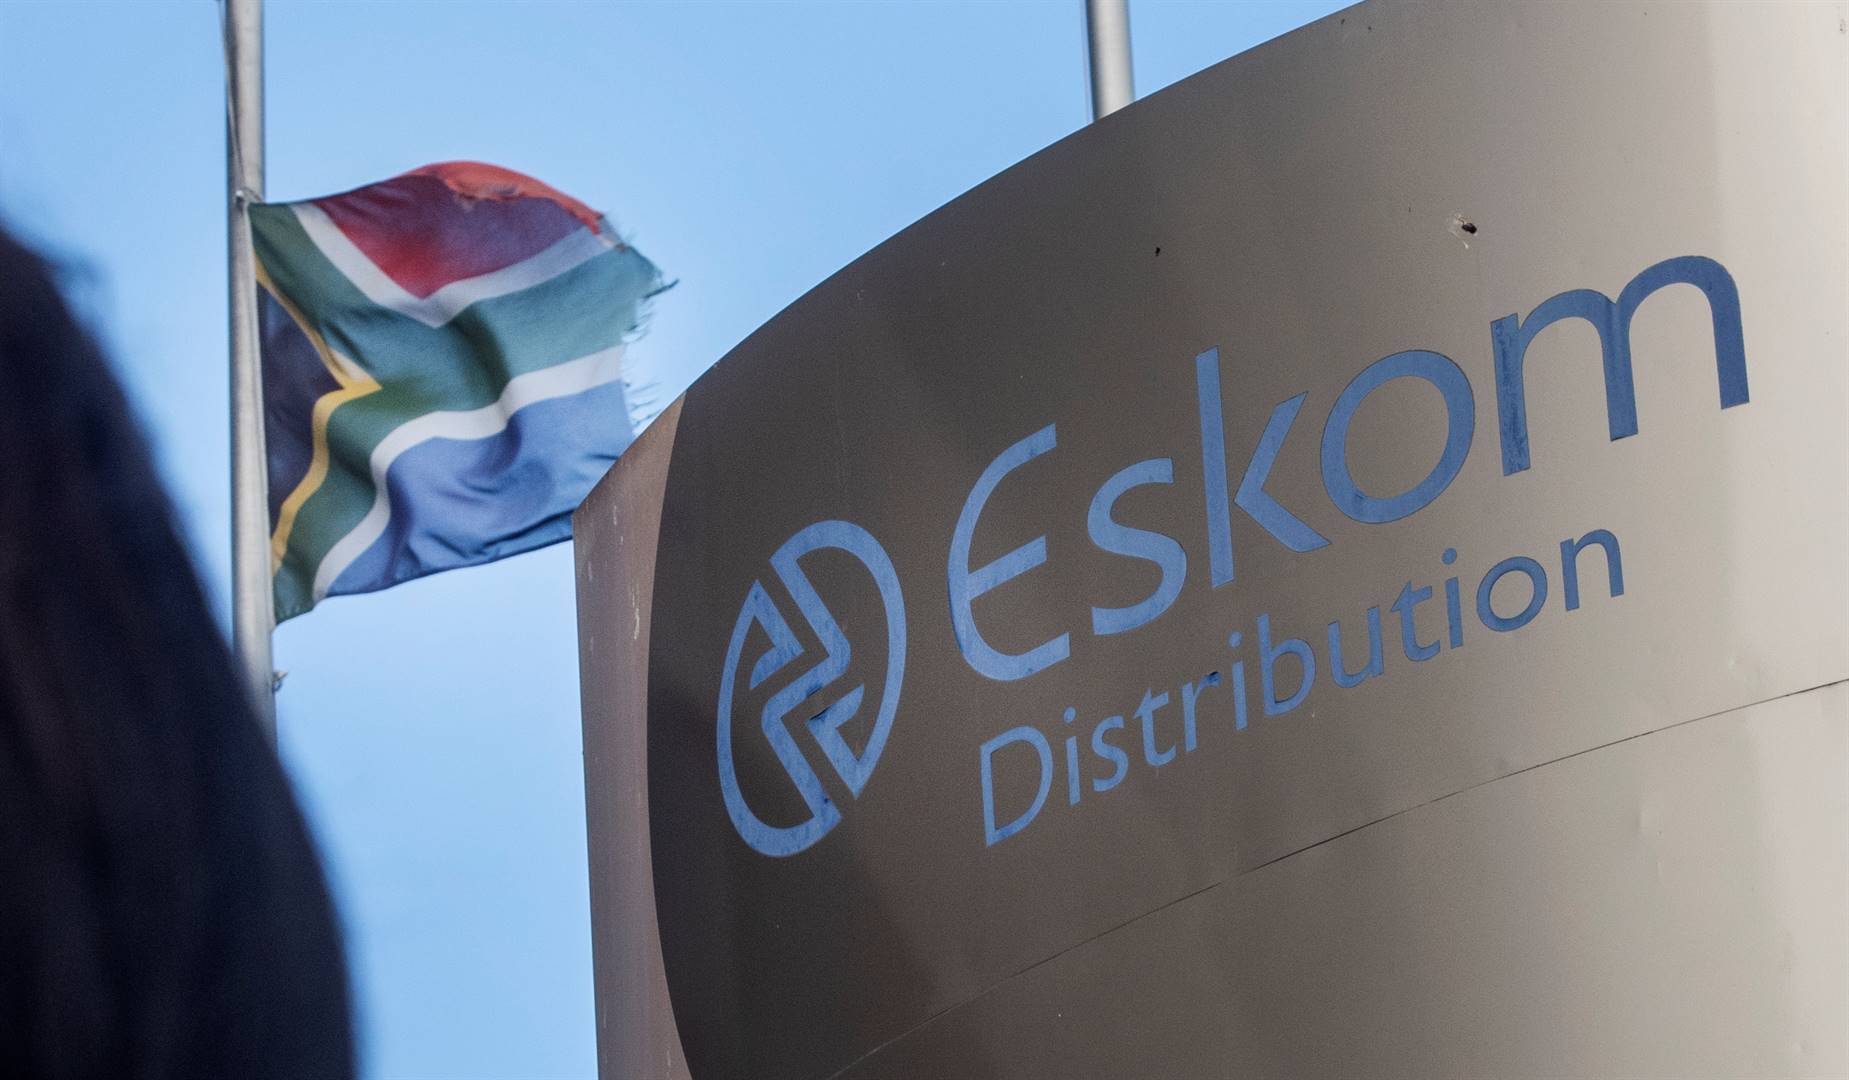 Last month, Eskom found clear evidence that points to sabotage at its Lethabo power station near Vereeniging in the Free State.  